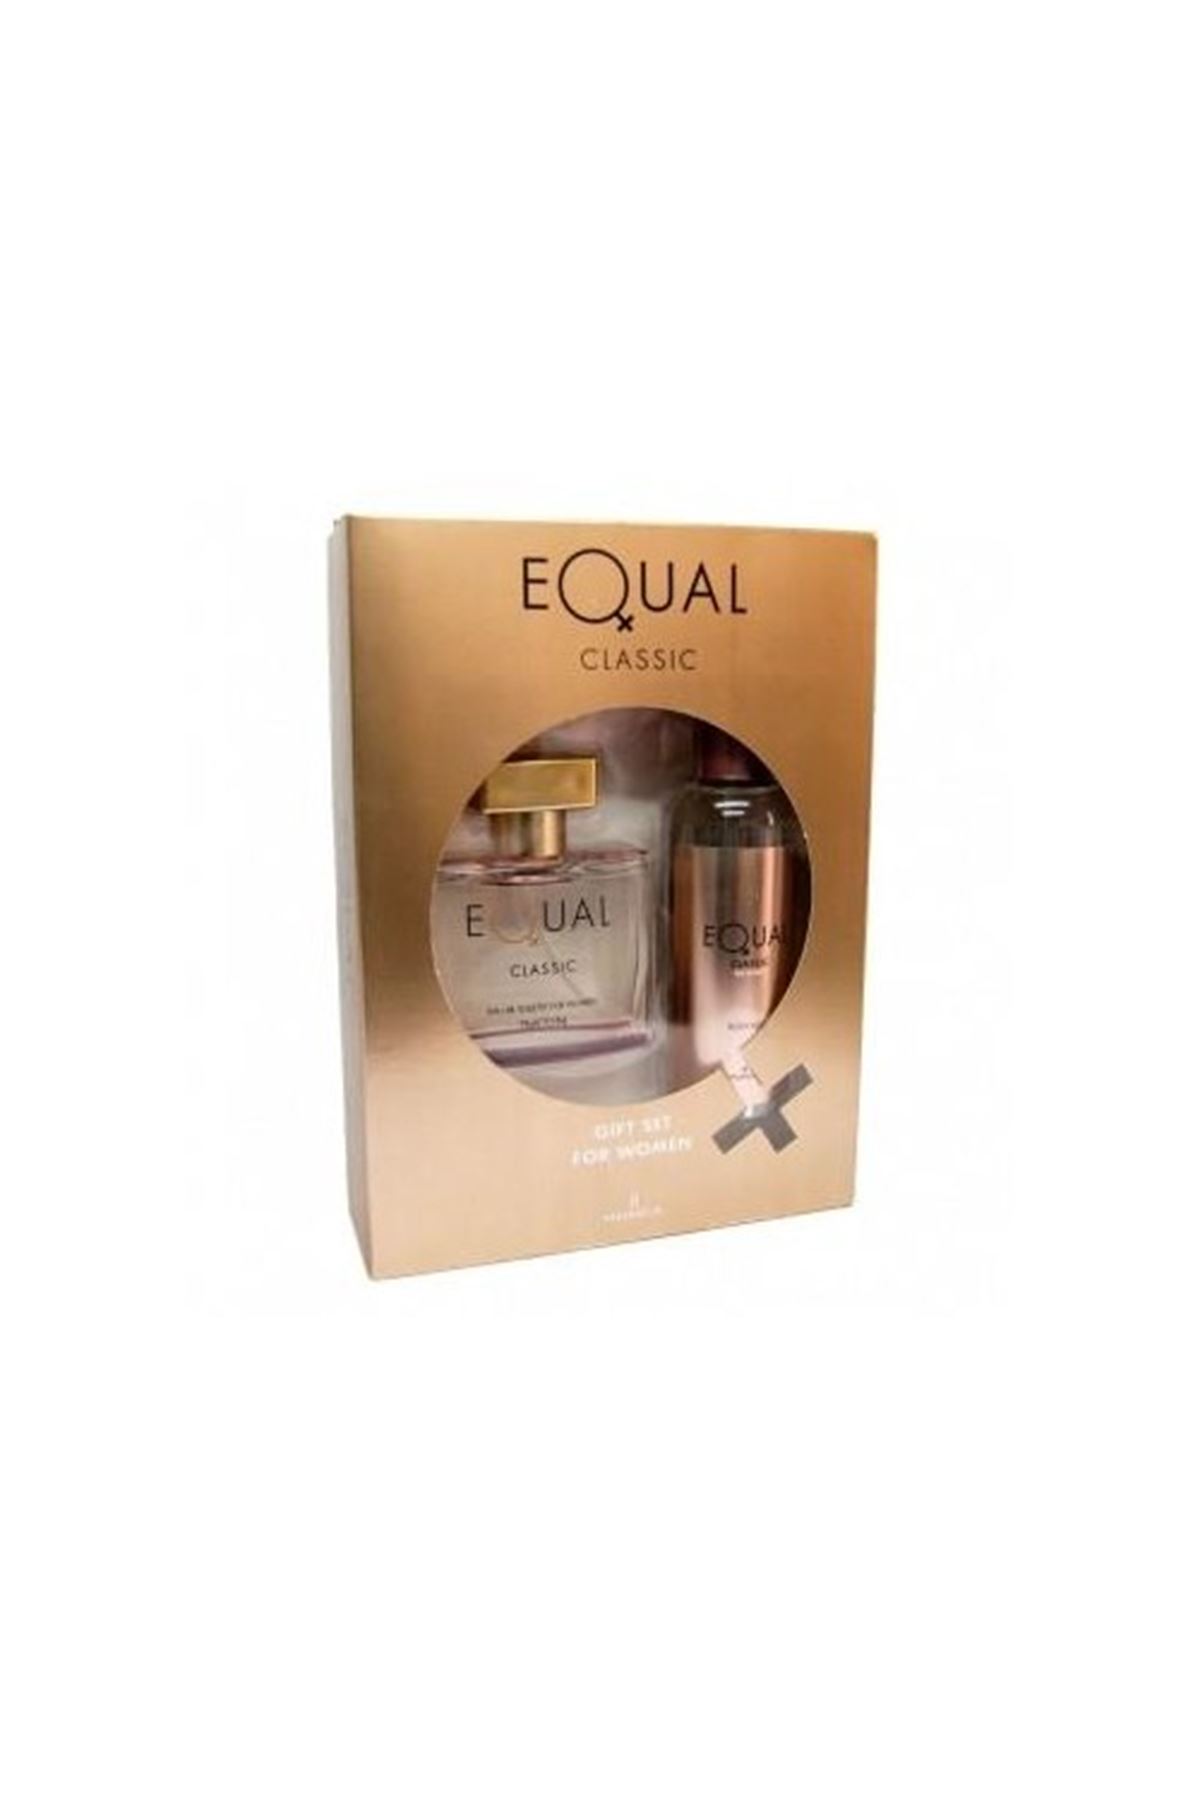 Equal Kofre Set Edt 75ml+deo 150ml Classic